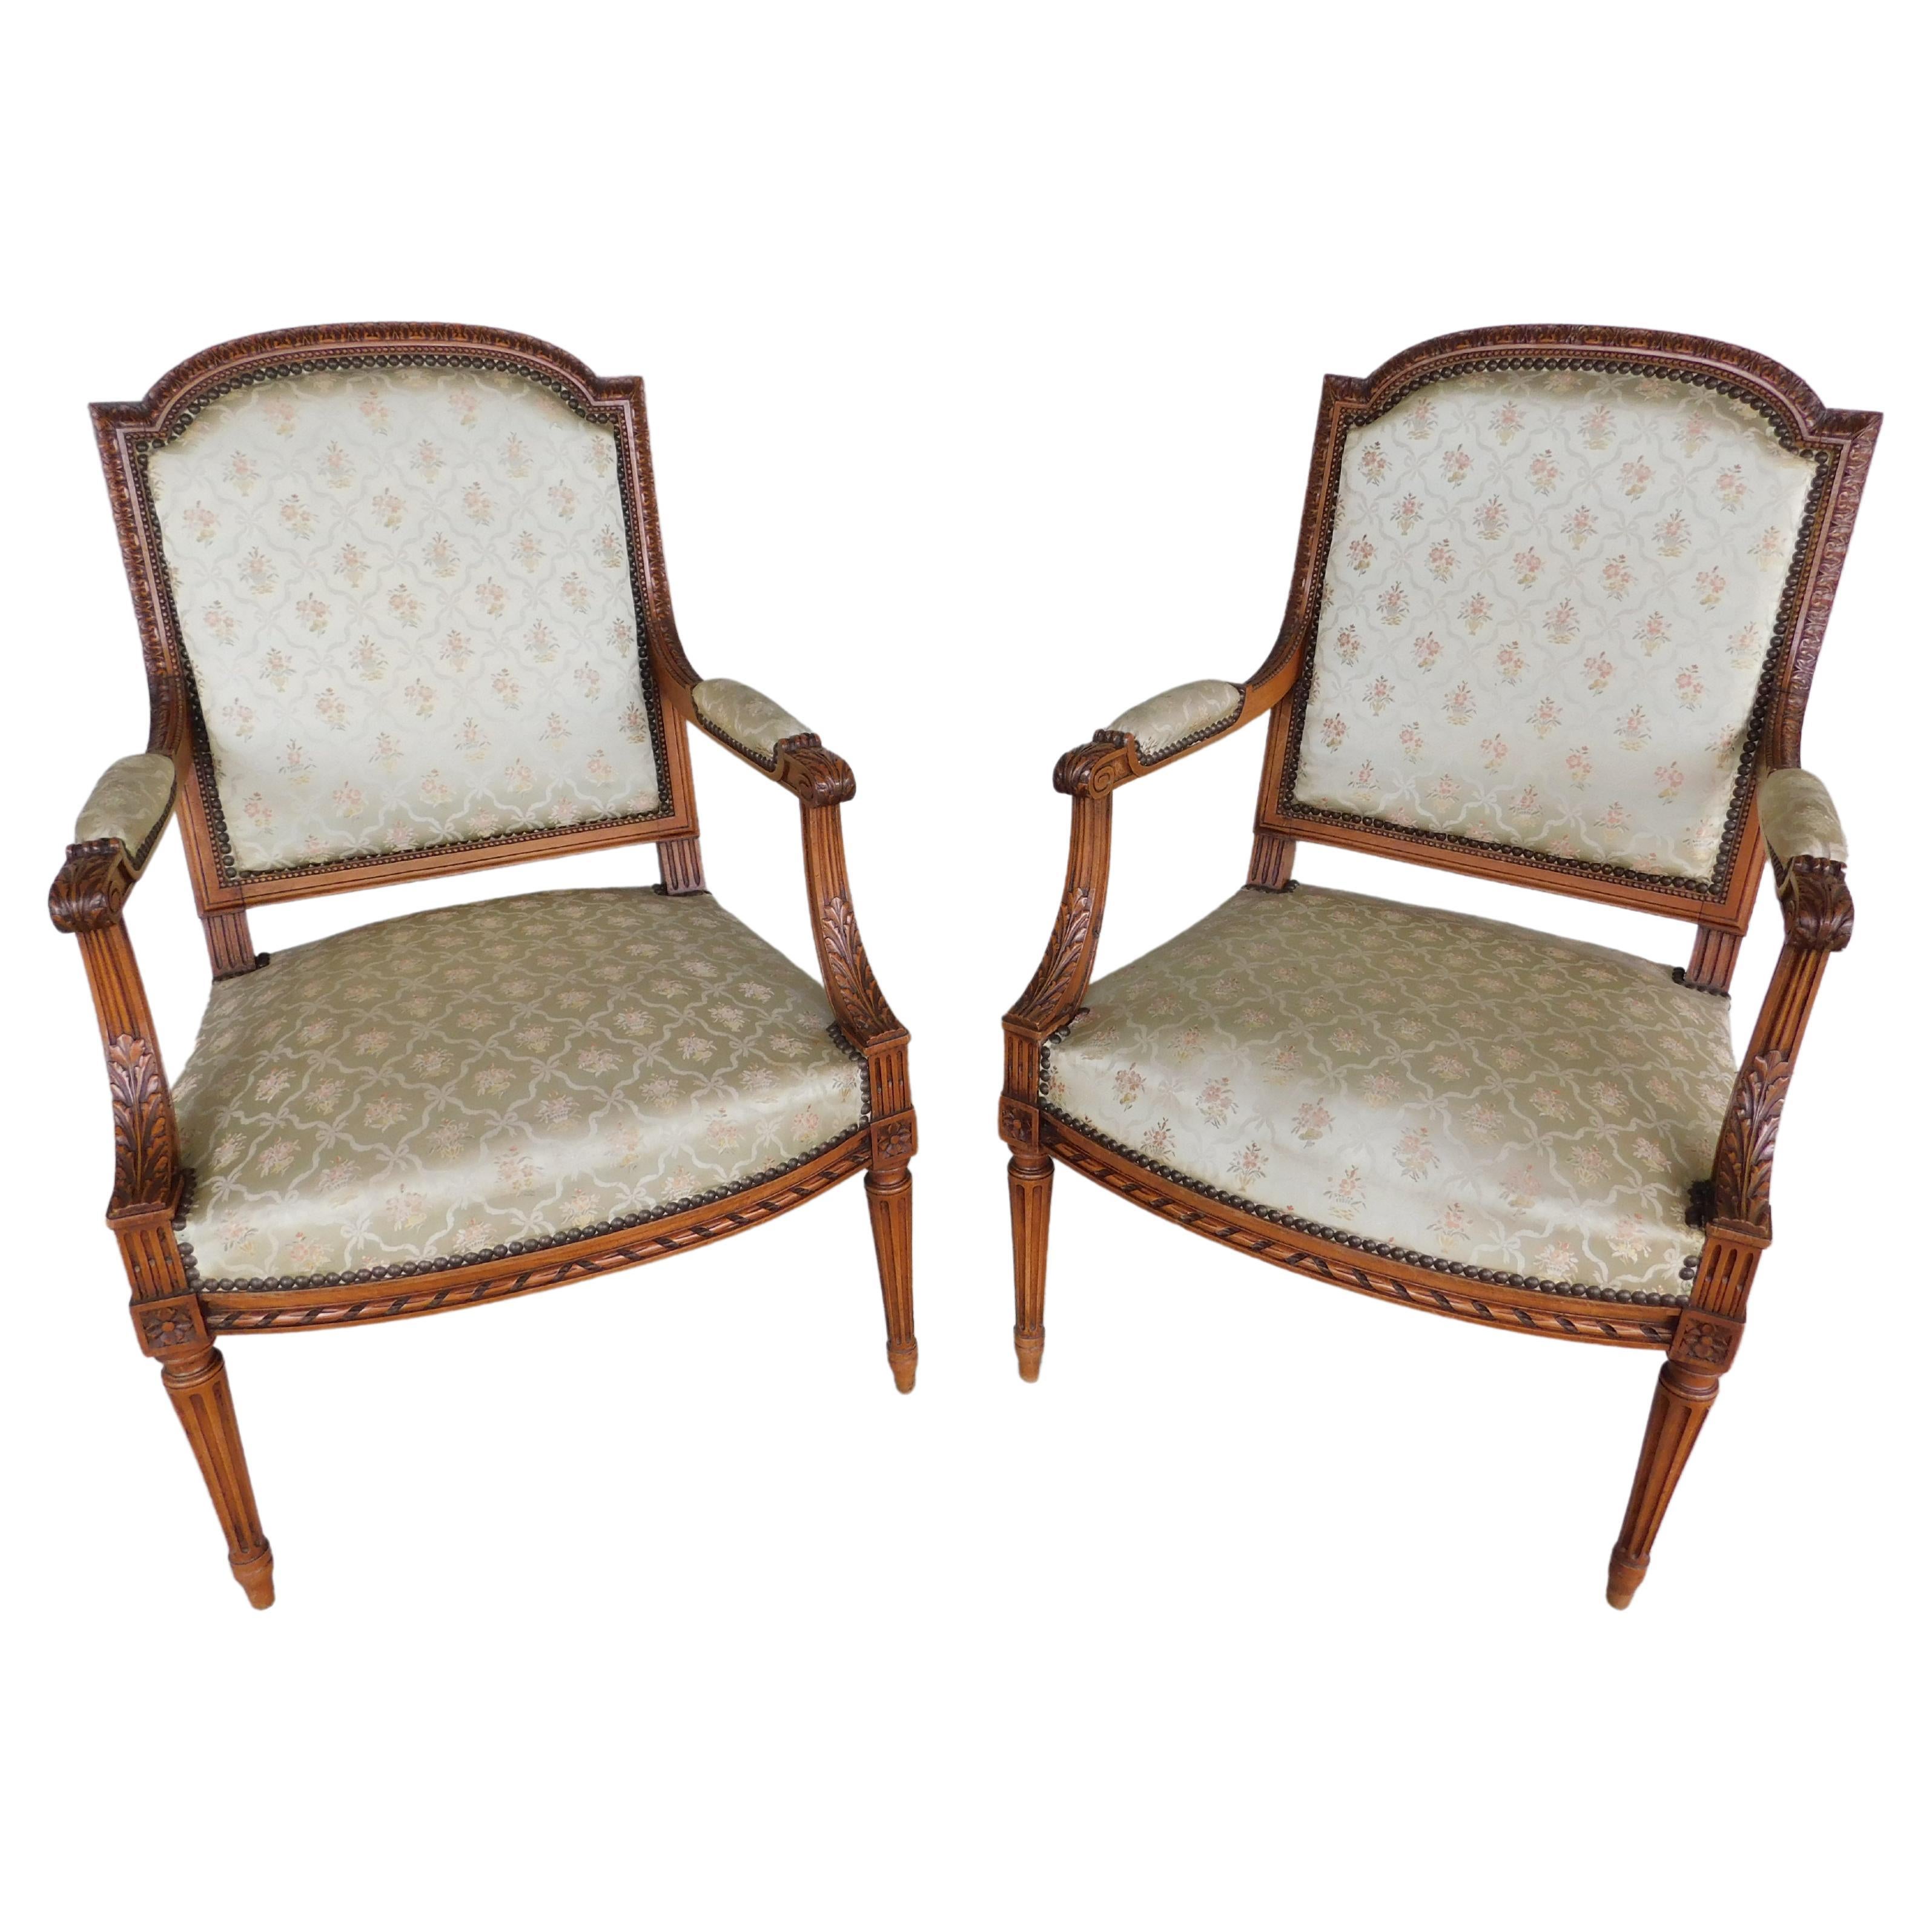 Antique French Louis XVI Style Fauteuil Chairs Late 19th Century, a Pair For Sale